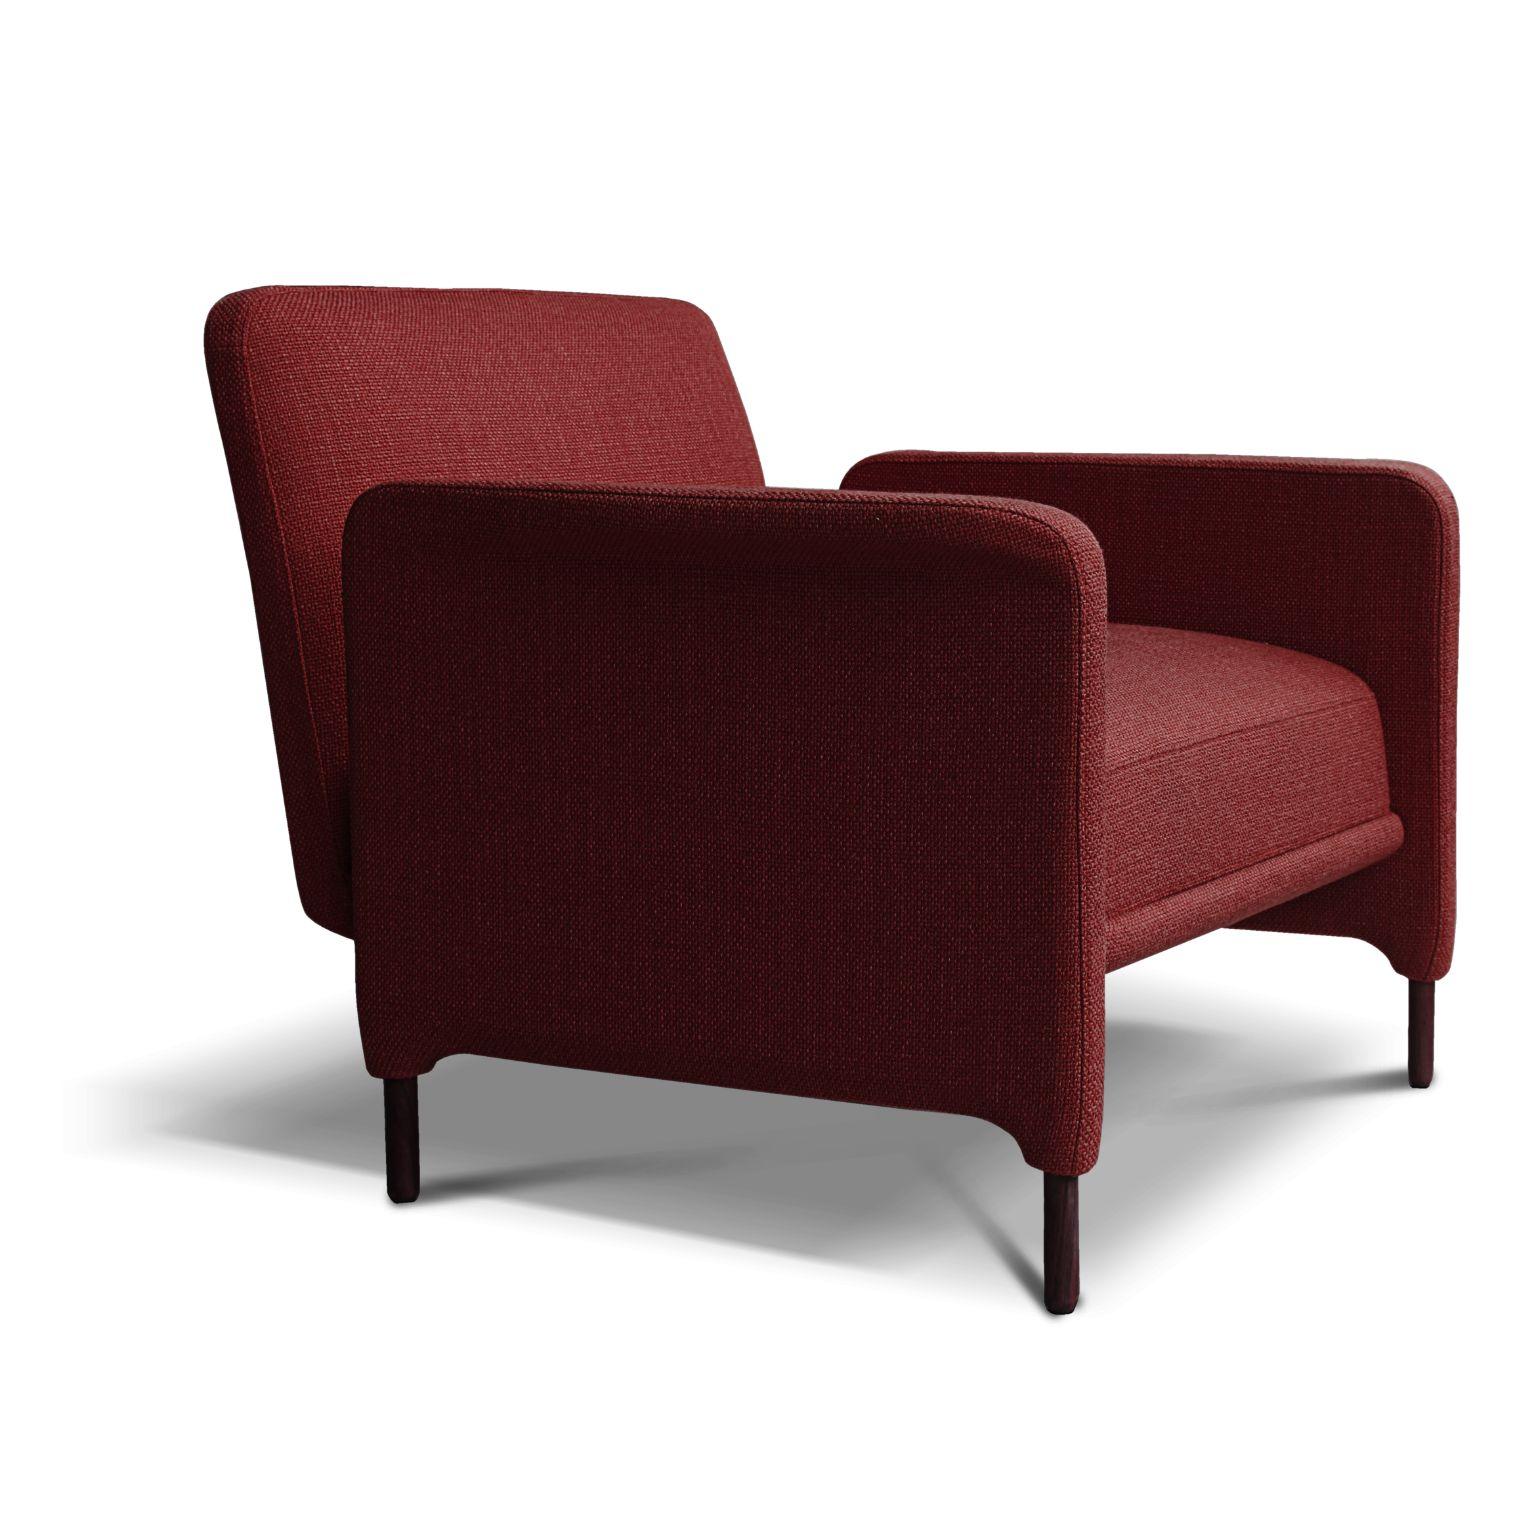 Set of 2 Bordeaux Carson armchair by Collector
Materials: Fully upholstered in boho 10 fabric
Solid walnut feet
Dimensions: W 86 x D 76 x H 70 cm
SH 43 cm.



Your favorite chair will be the one that allows you to relax in a way that make